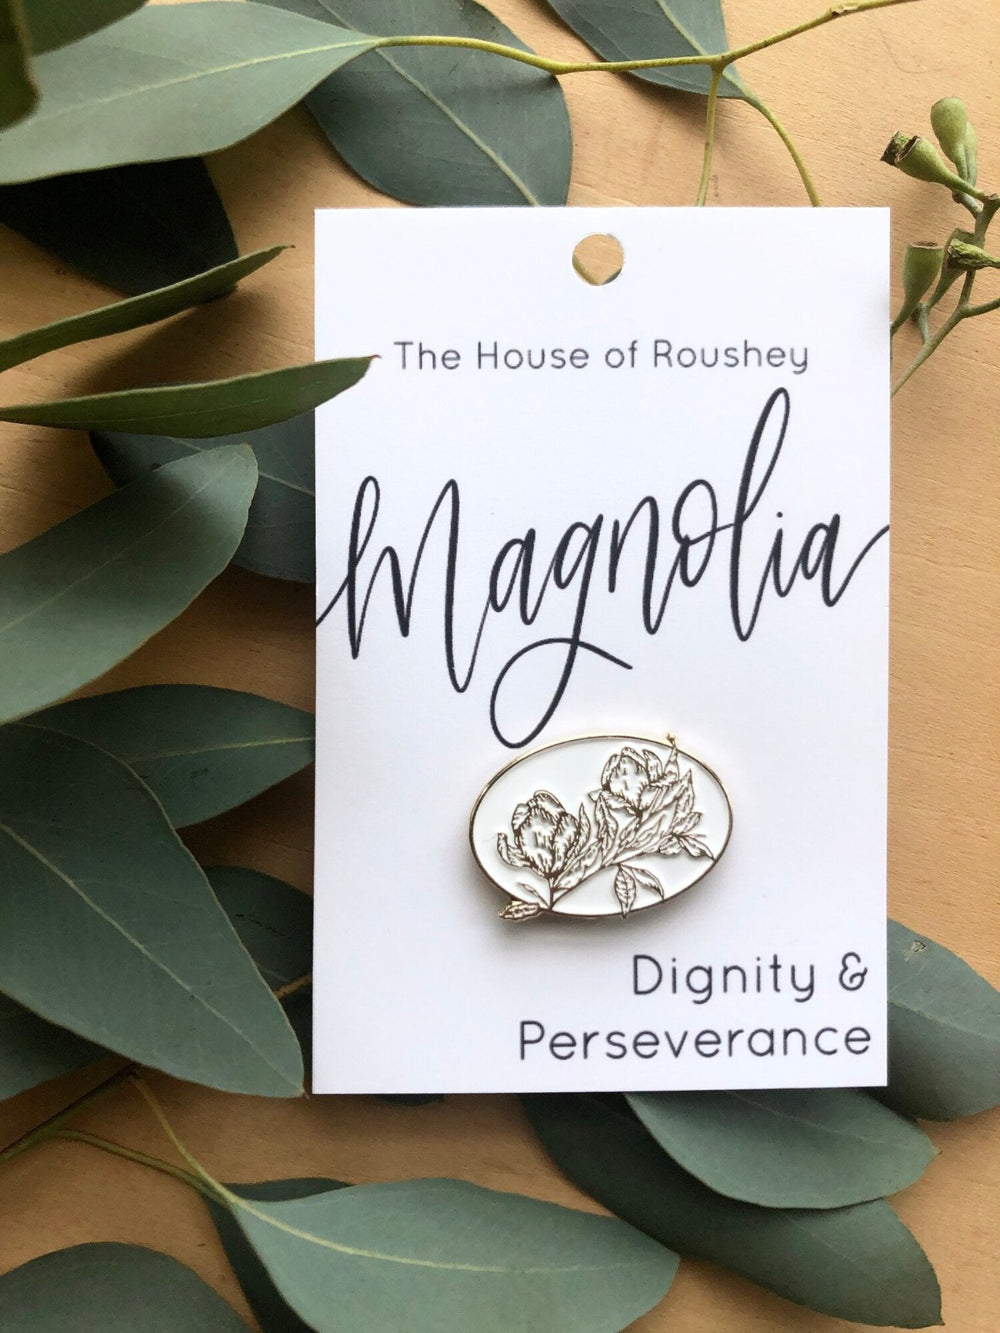 Enamel Pins by Christy Roushey | The House of Roushey, Magnolia pin. It is a white pin in an oval shape with magnolia flowers outlined with fine lines. The bottom of the label reads "Dignity & Perseverance".